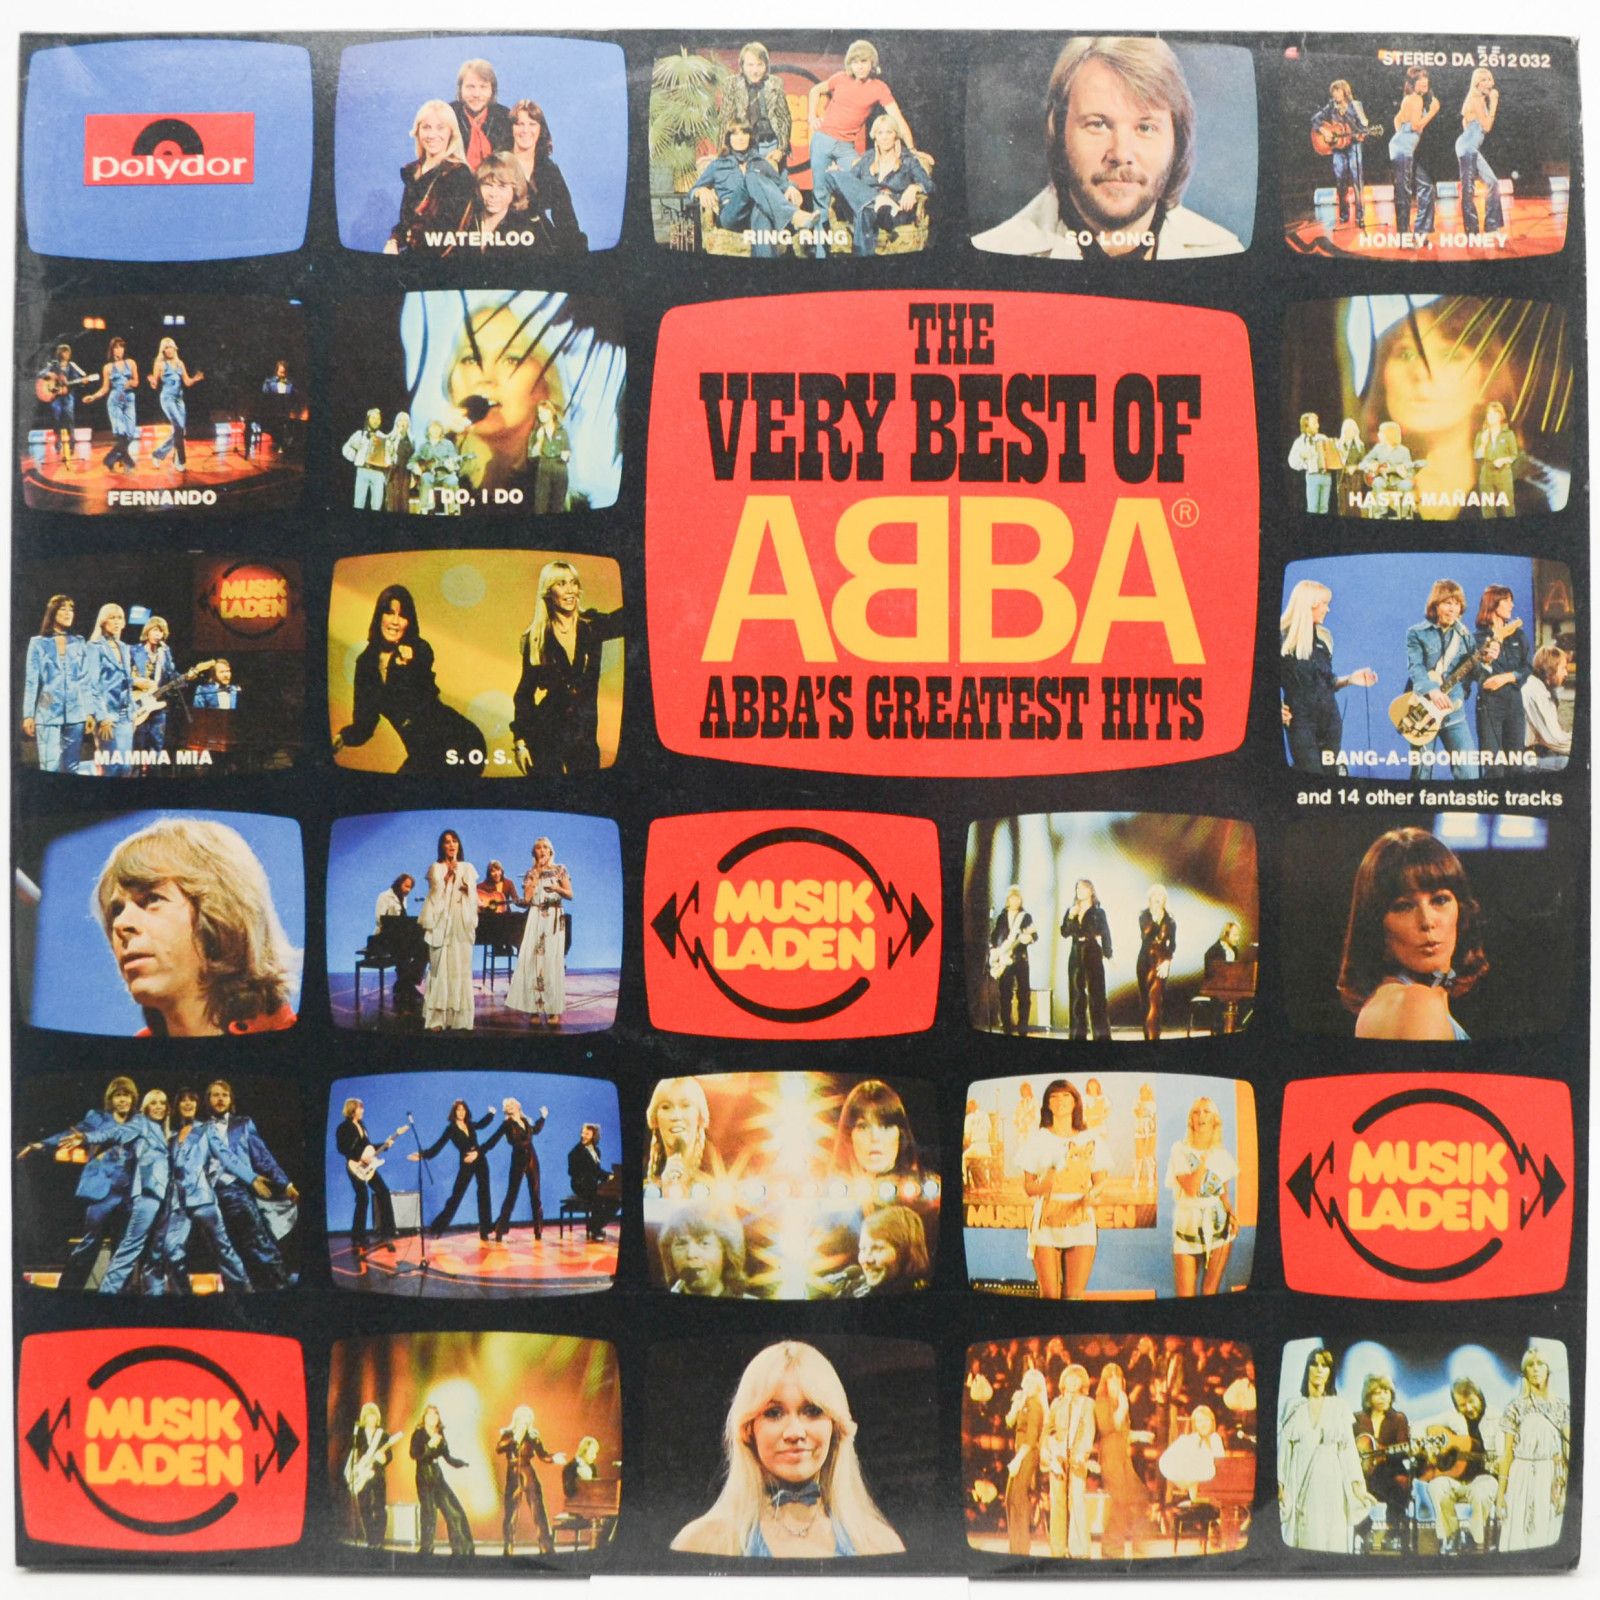 ABBA — The Very Best Of ABBA (ABBA's Greatest Hits) (2LP), 1973